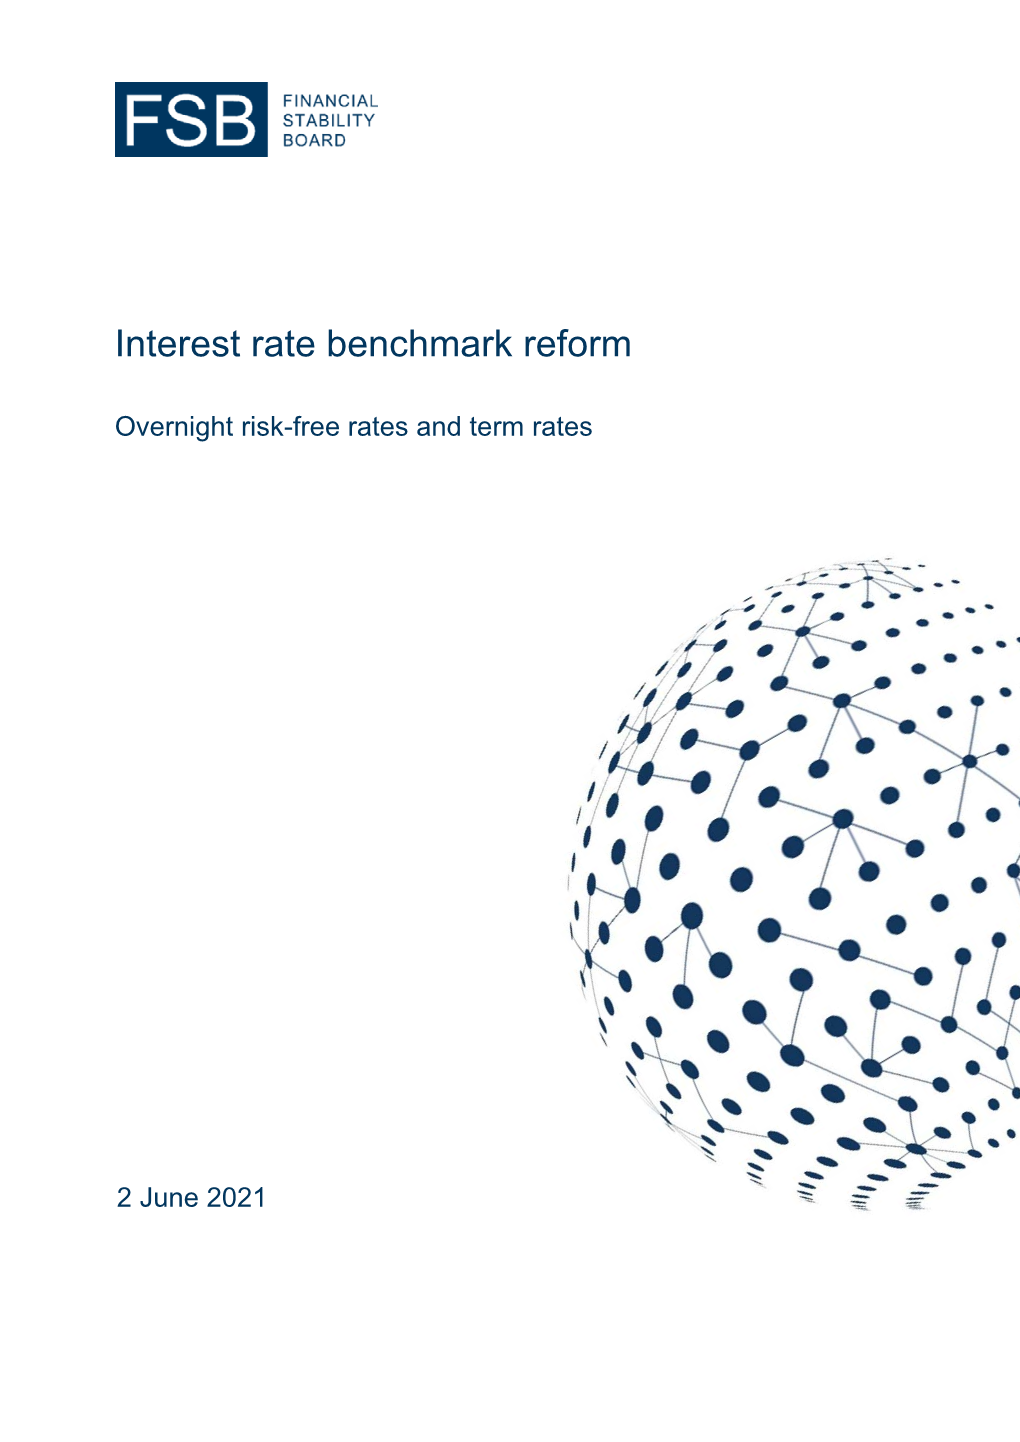 Interest Rate Benchmark Reform: Overnight Risk-Free Rates and Term